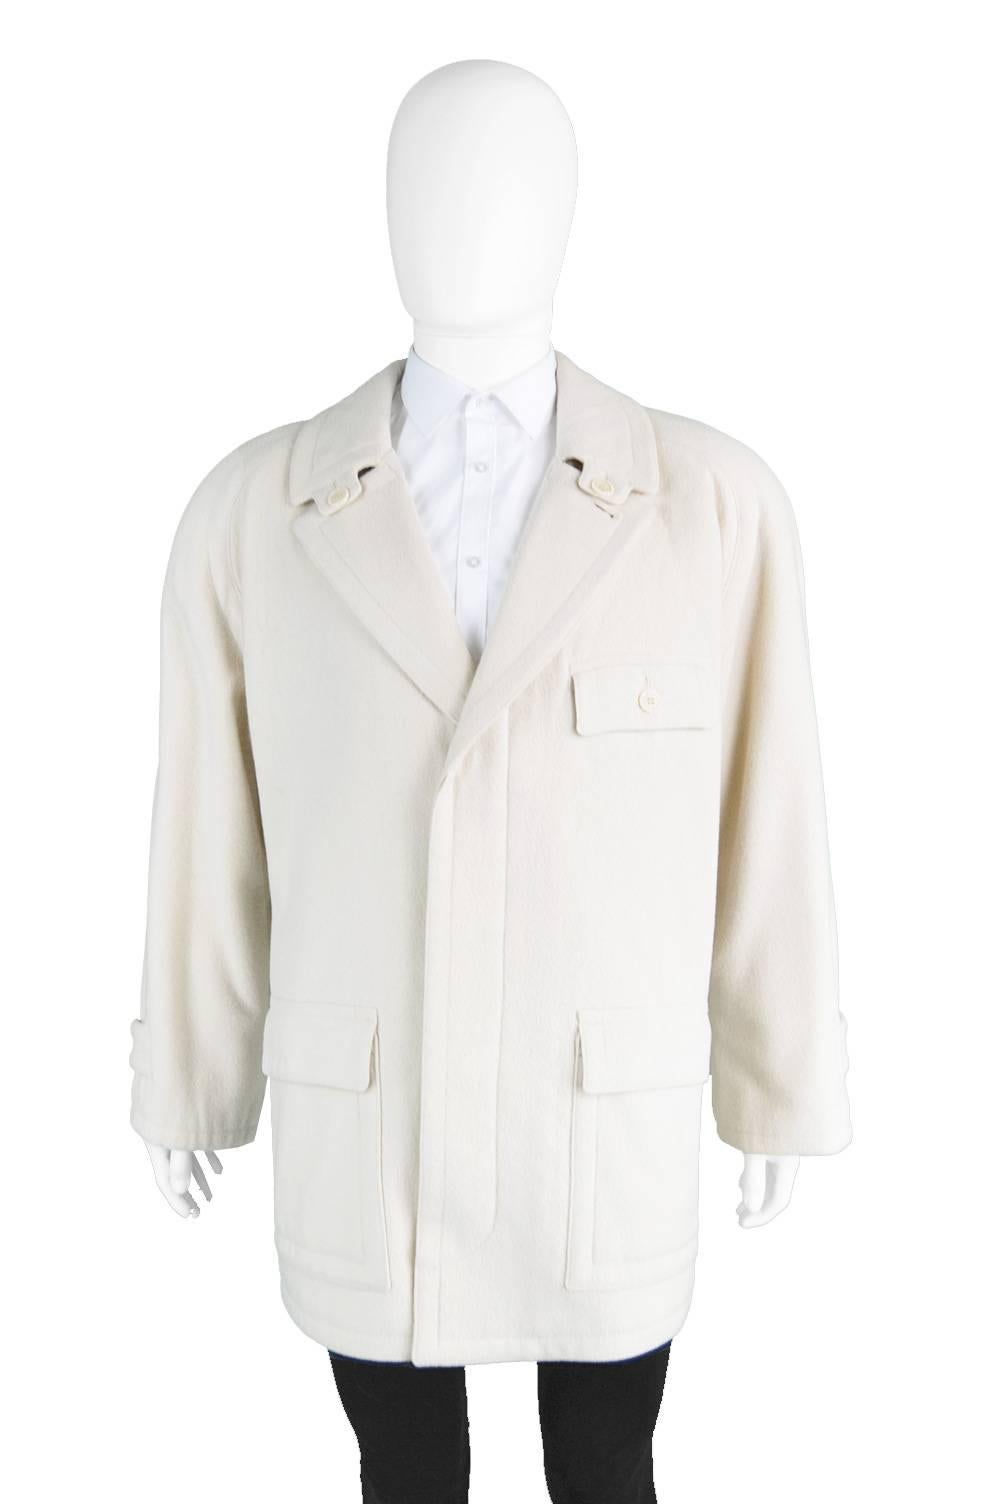 Louis Féraud Men's Cream Italian Wool Raglan Sleeve Coat, 1980s In Good Condition For Sale In Doncaster, South Yorkshire